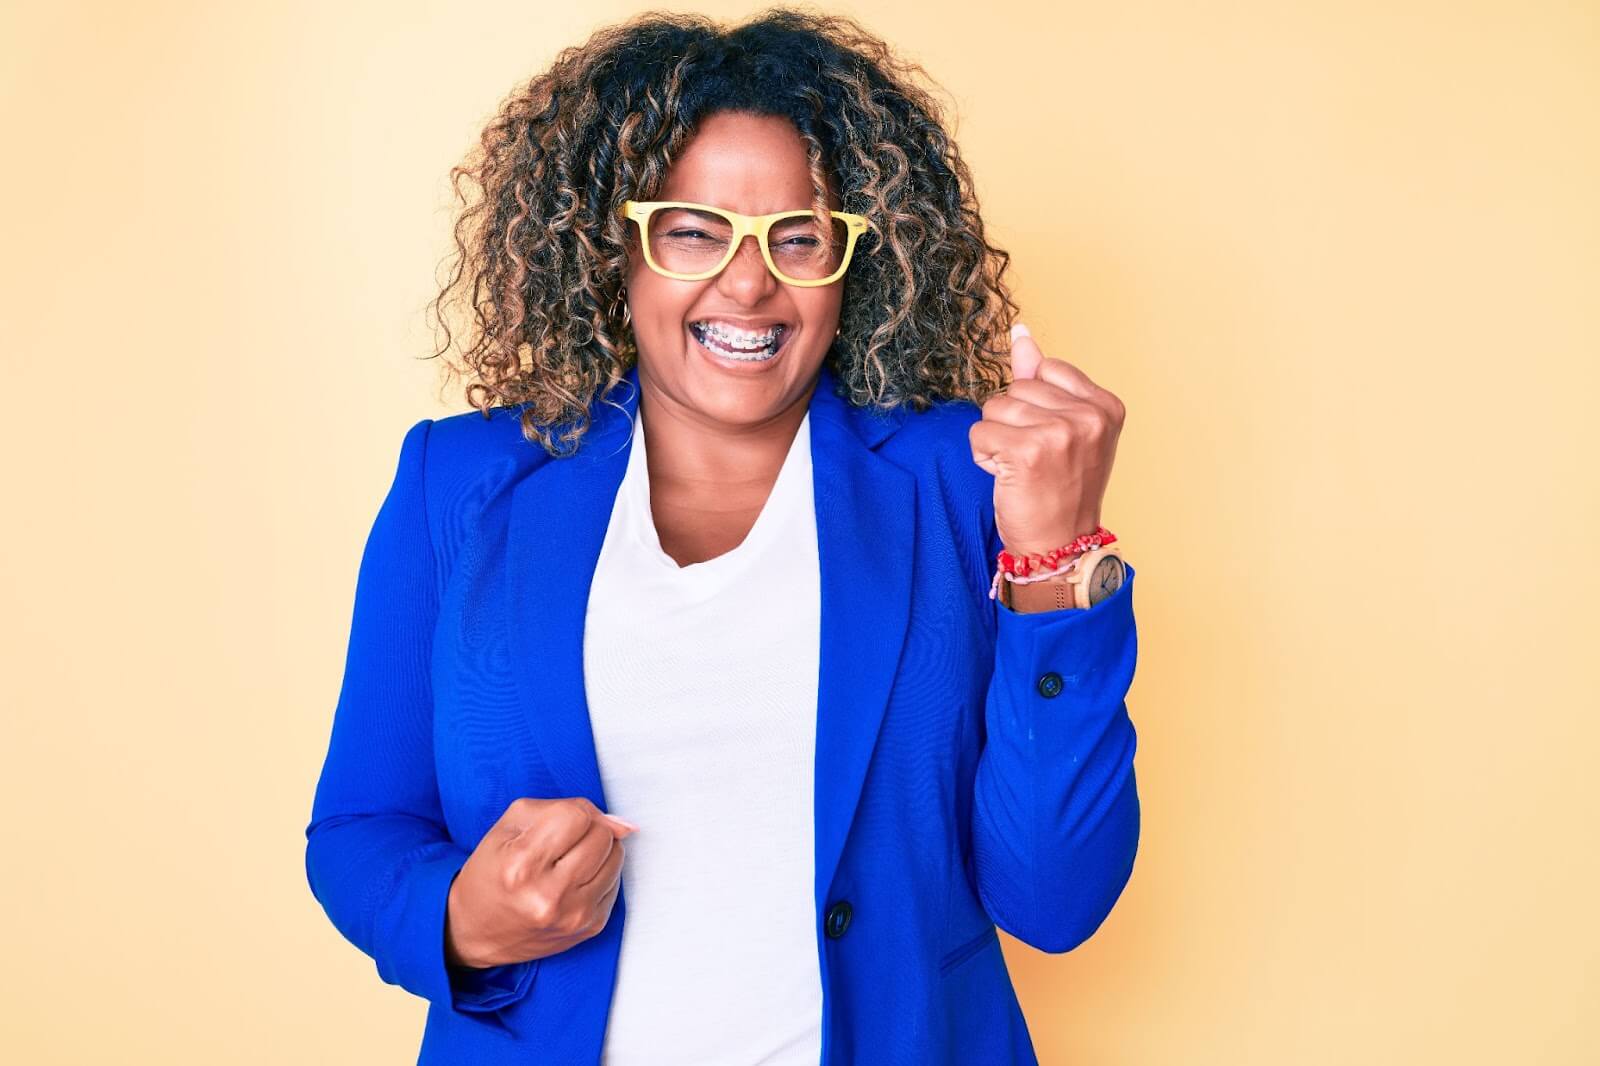 Woman with curly hair wearing bright blue blazer and yellow glasses smiling and pumping her fist in excitement